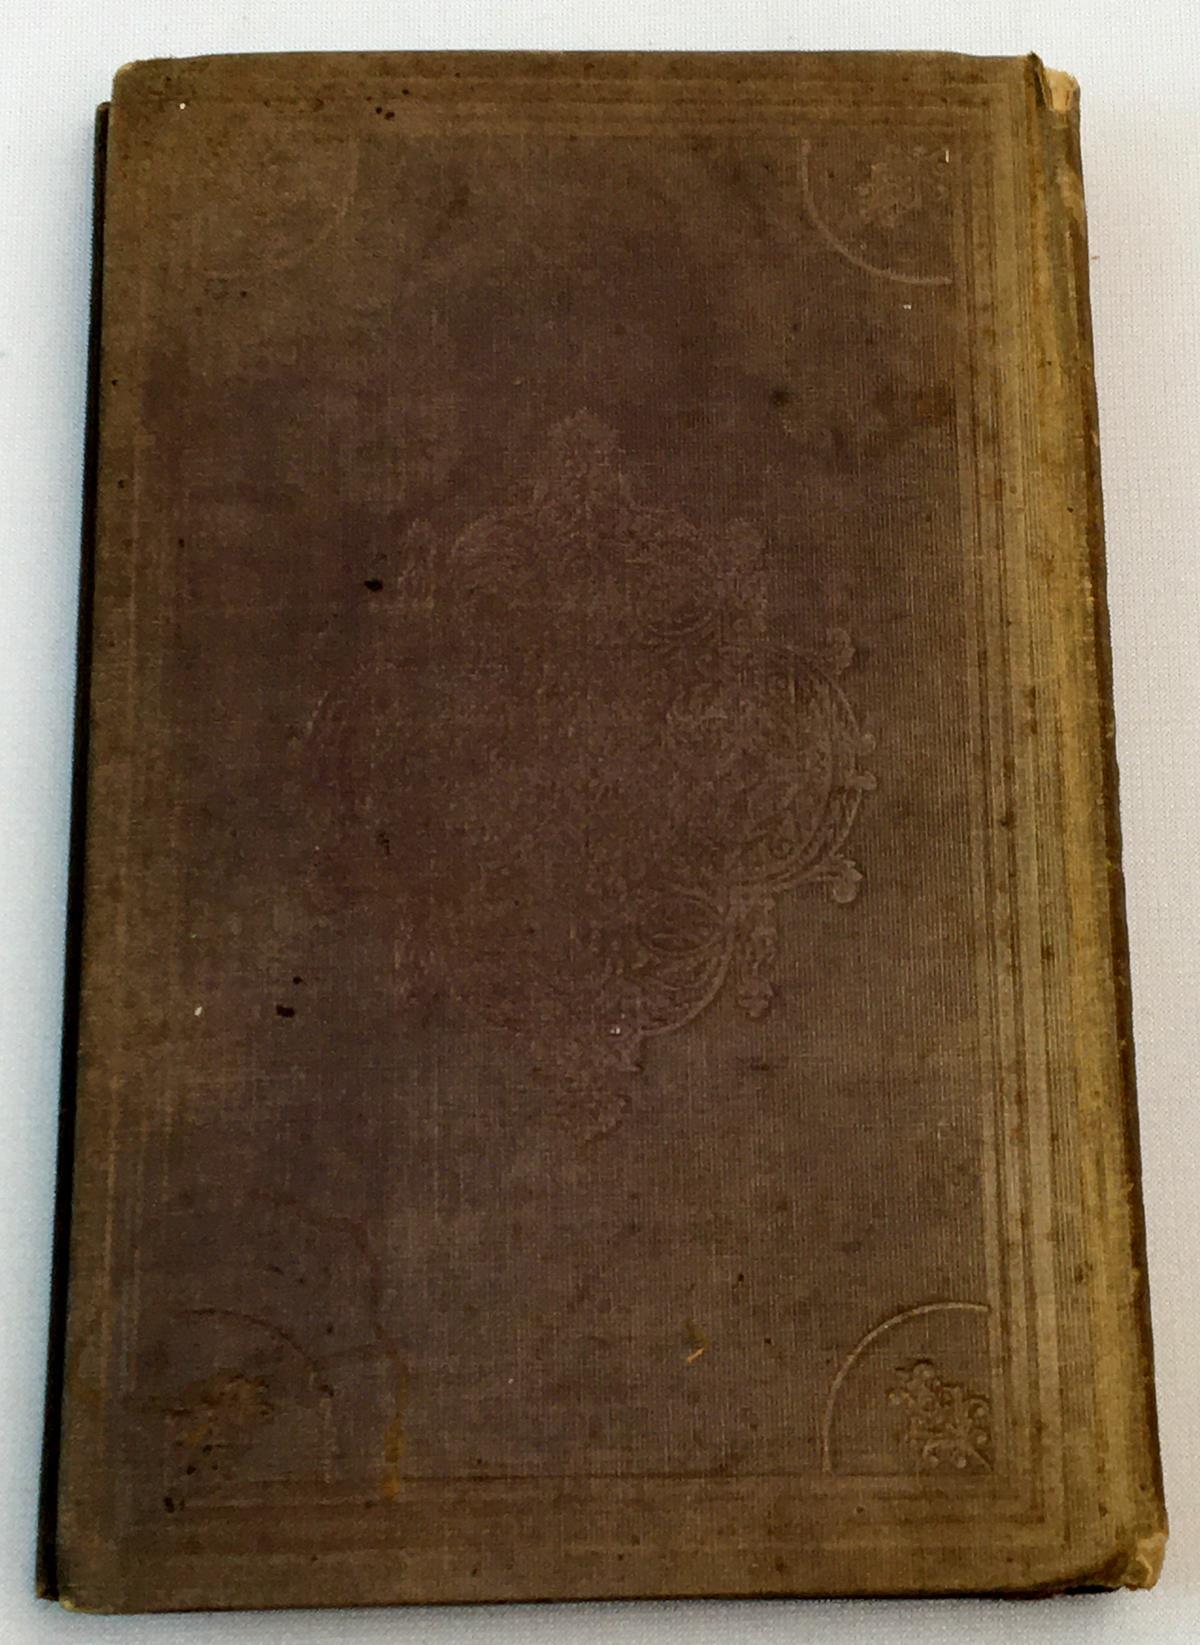 1849 Kavanaugh: A Tale By Henry Wadsworth Longfellow FIRST EDITION